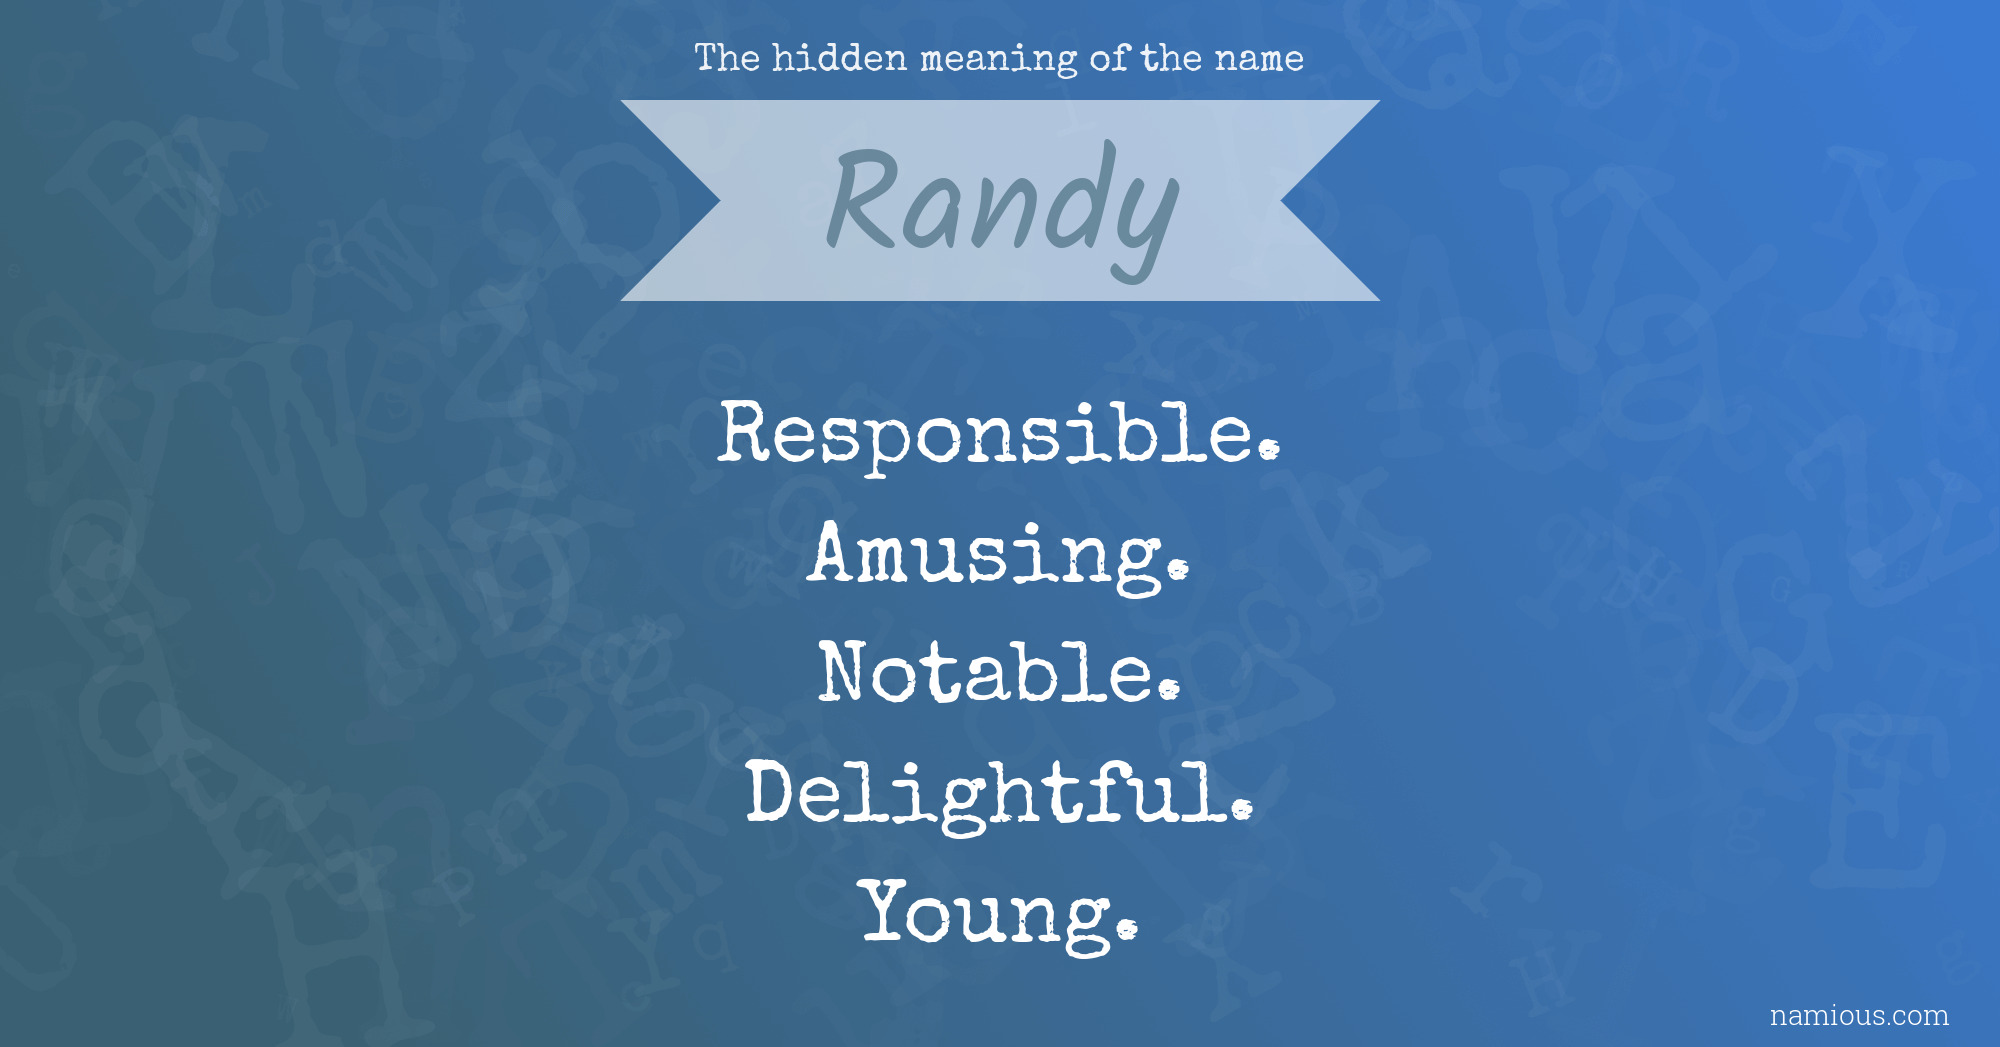 The hidden meaning of the name Randy